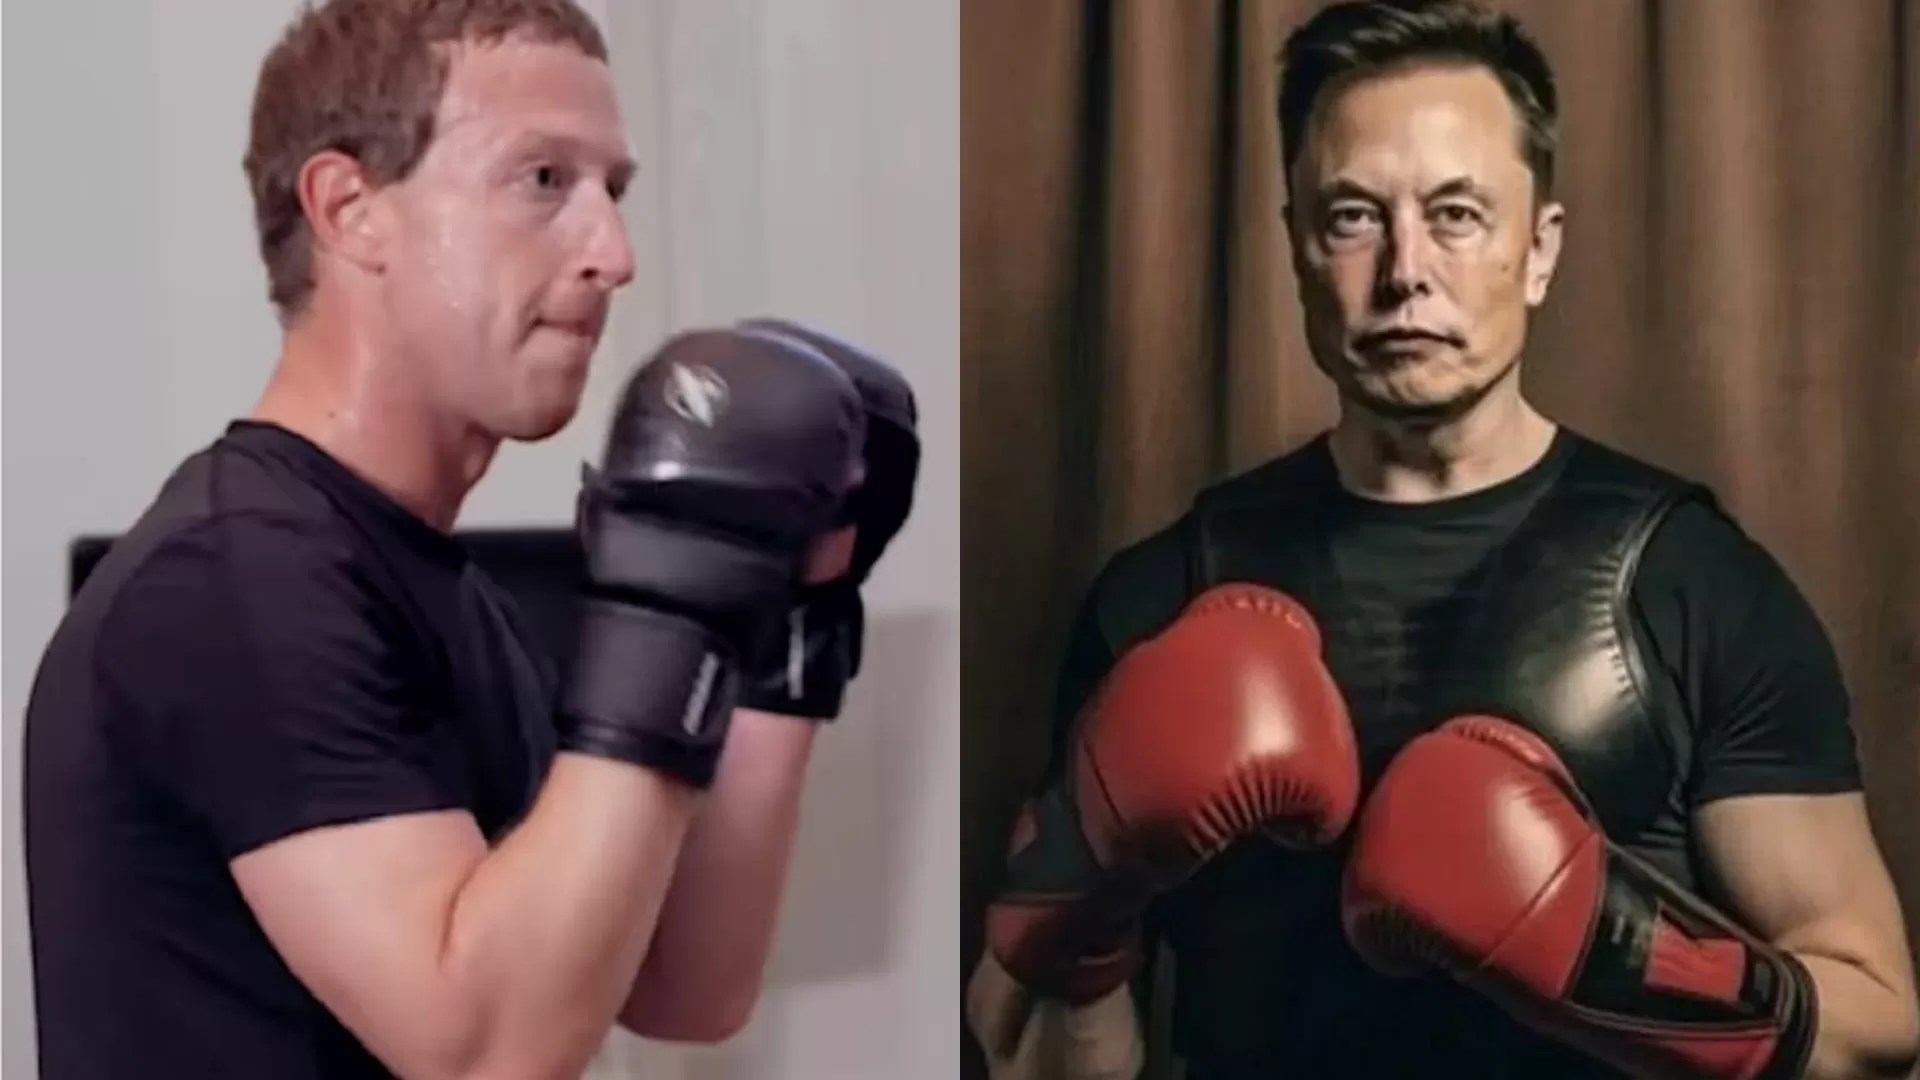 Italian Government Reaches Out To Host Elon Musk vs Mark Zuckerberg Is